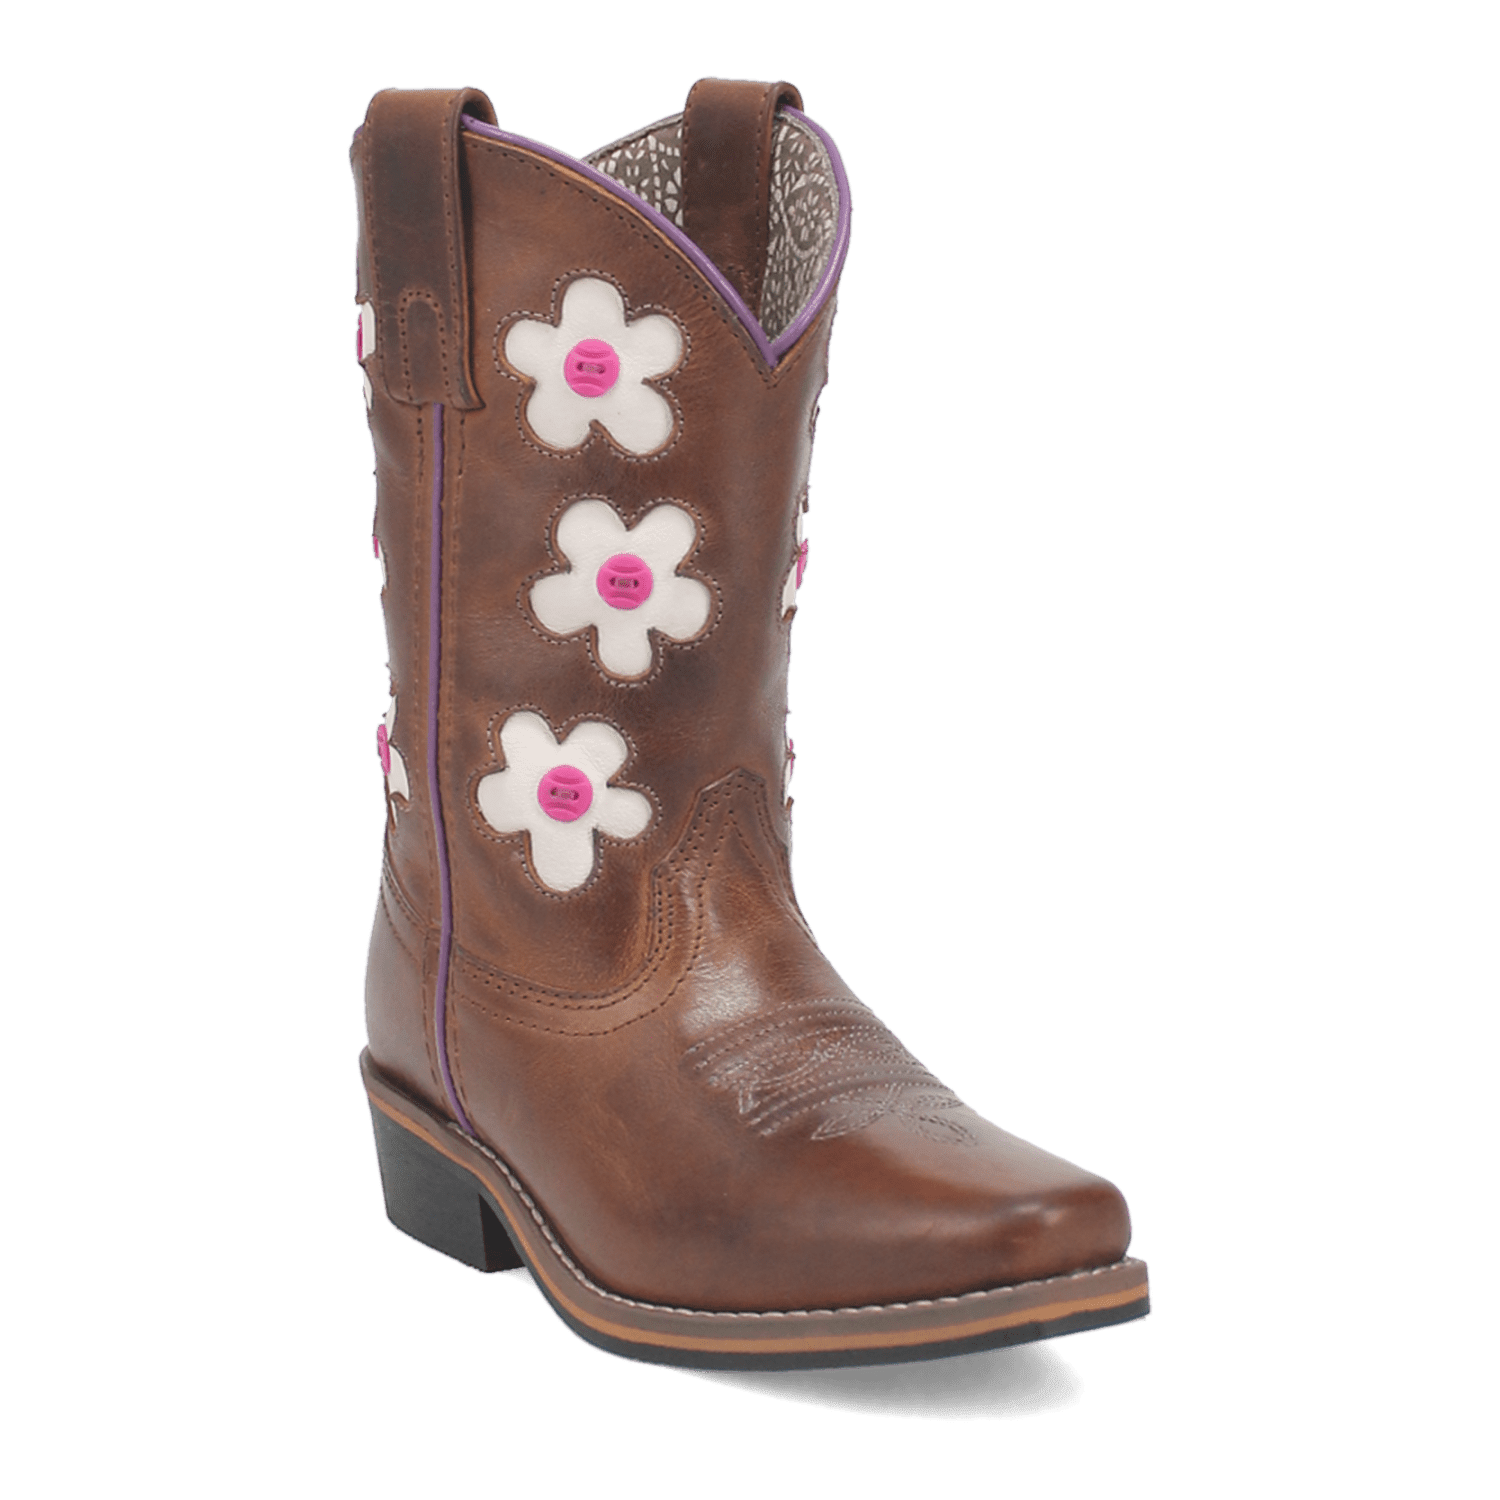 GISELLE COLOR CHANGING LEATHER CHILDREN'S BOOT Image